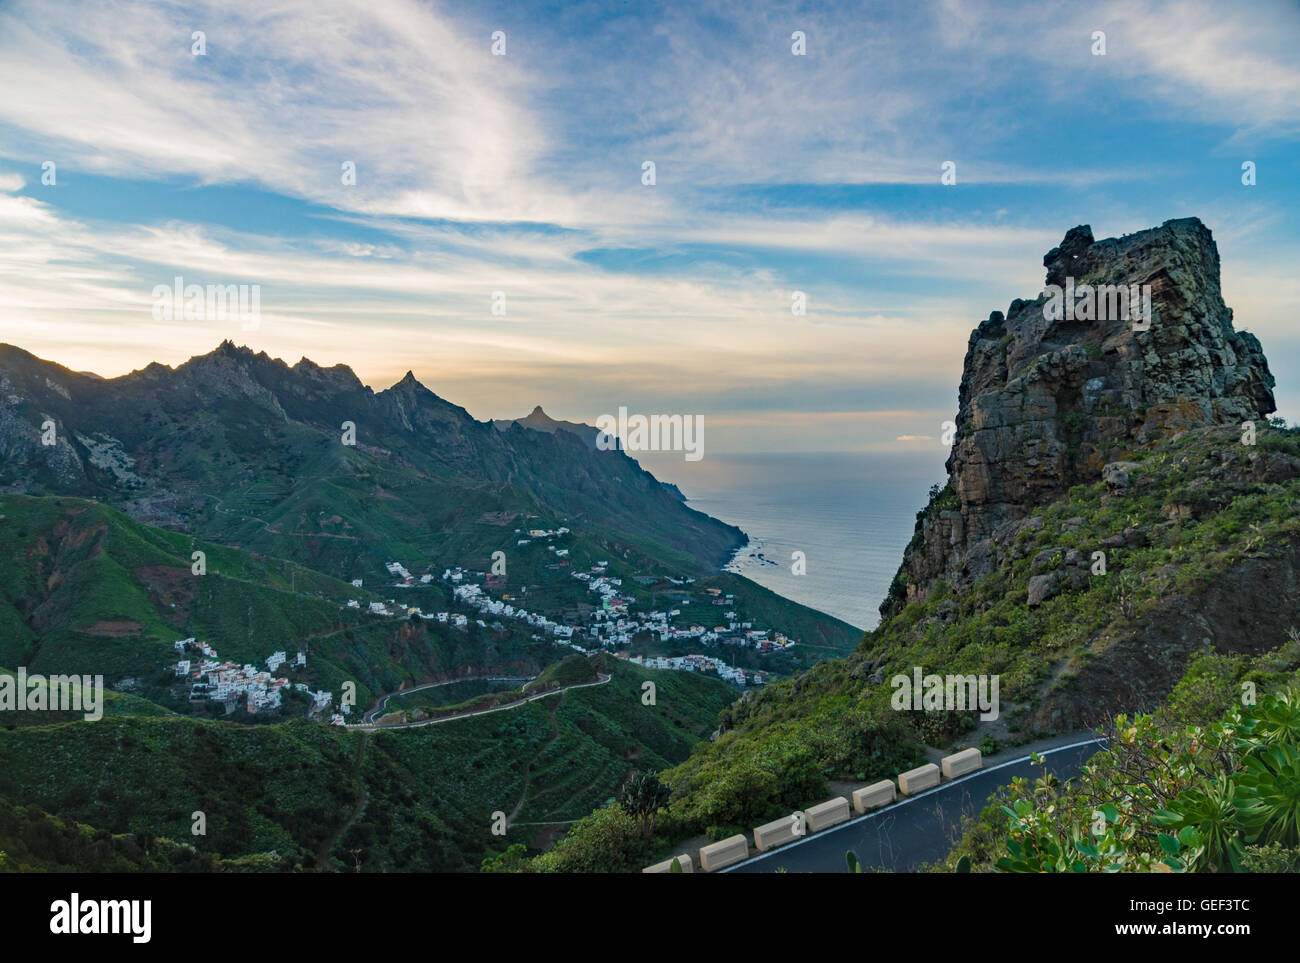 After sunset view on Almaciga village on slope of Anaga mountains, Tenerife, Canary islands, Spain Stock Photo